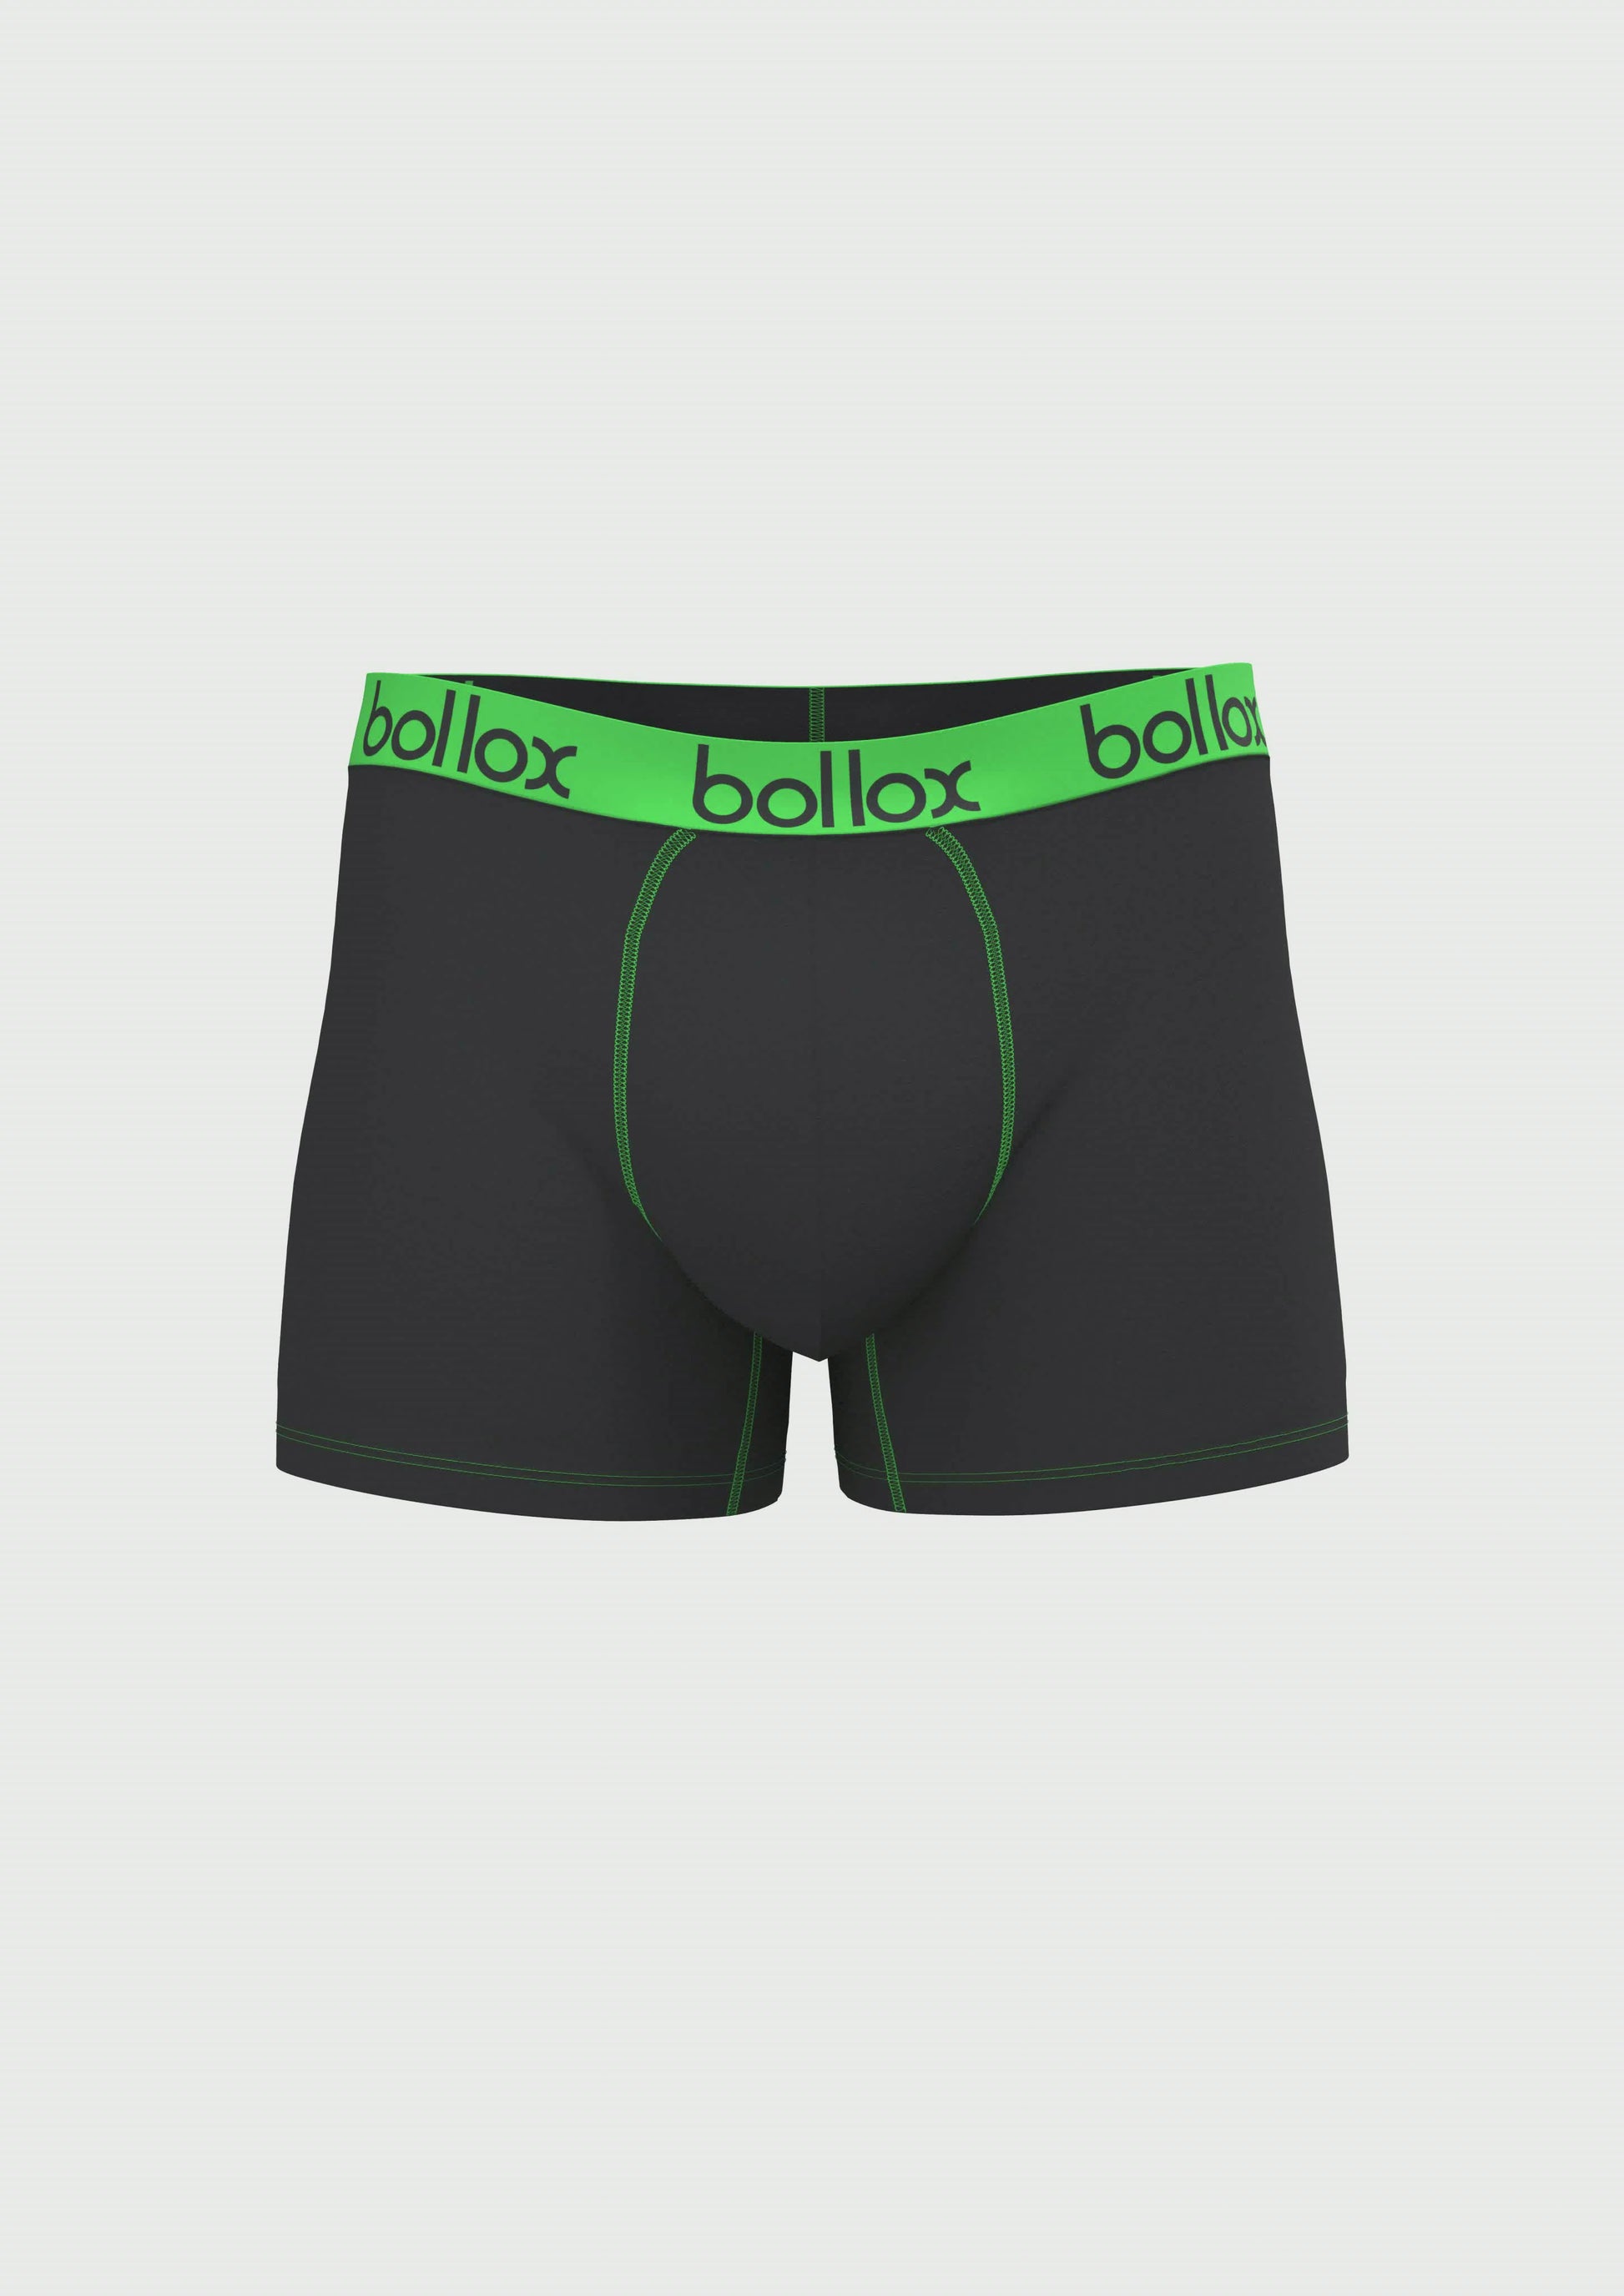 Black with Green - Men's Trunk - Bamboo & Cotton Blend (1Pack